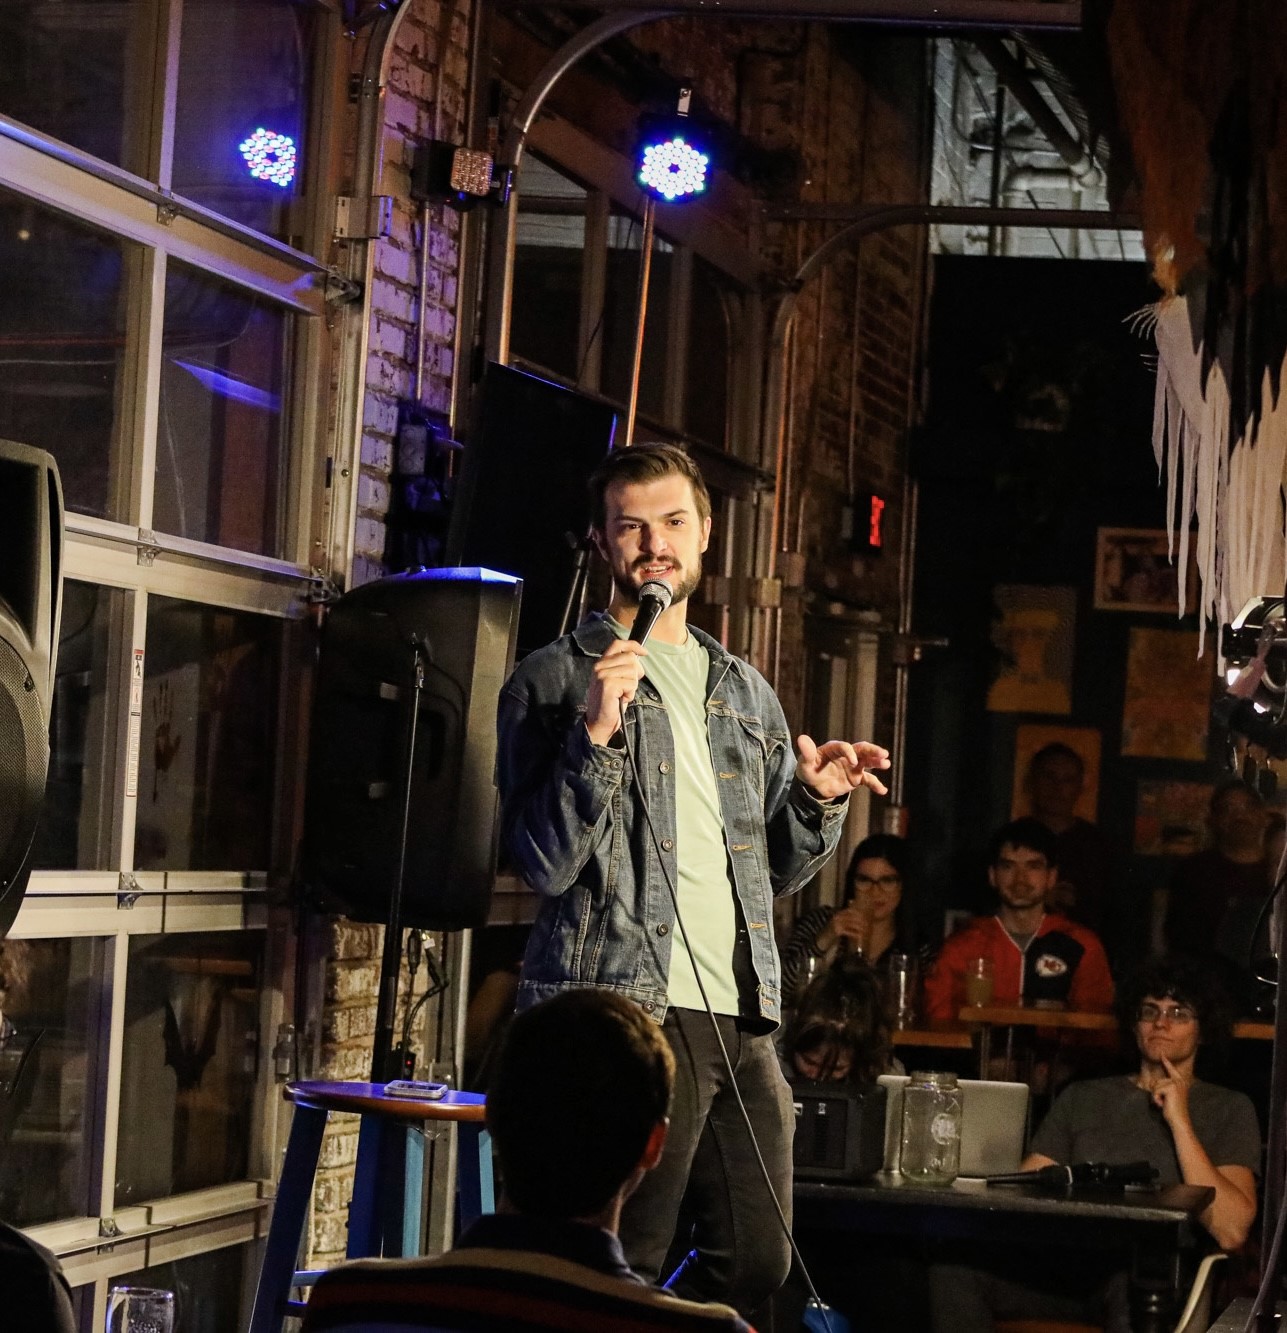 Tyler Ross Fri. 7:30 Show Funny Stop Comedy Club on May 19, 19:30@Funny Stop Comedy Club - Buy tickets and Get information on Funny Stop funnystop.online